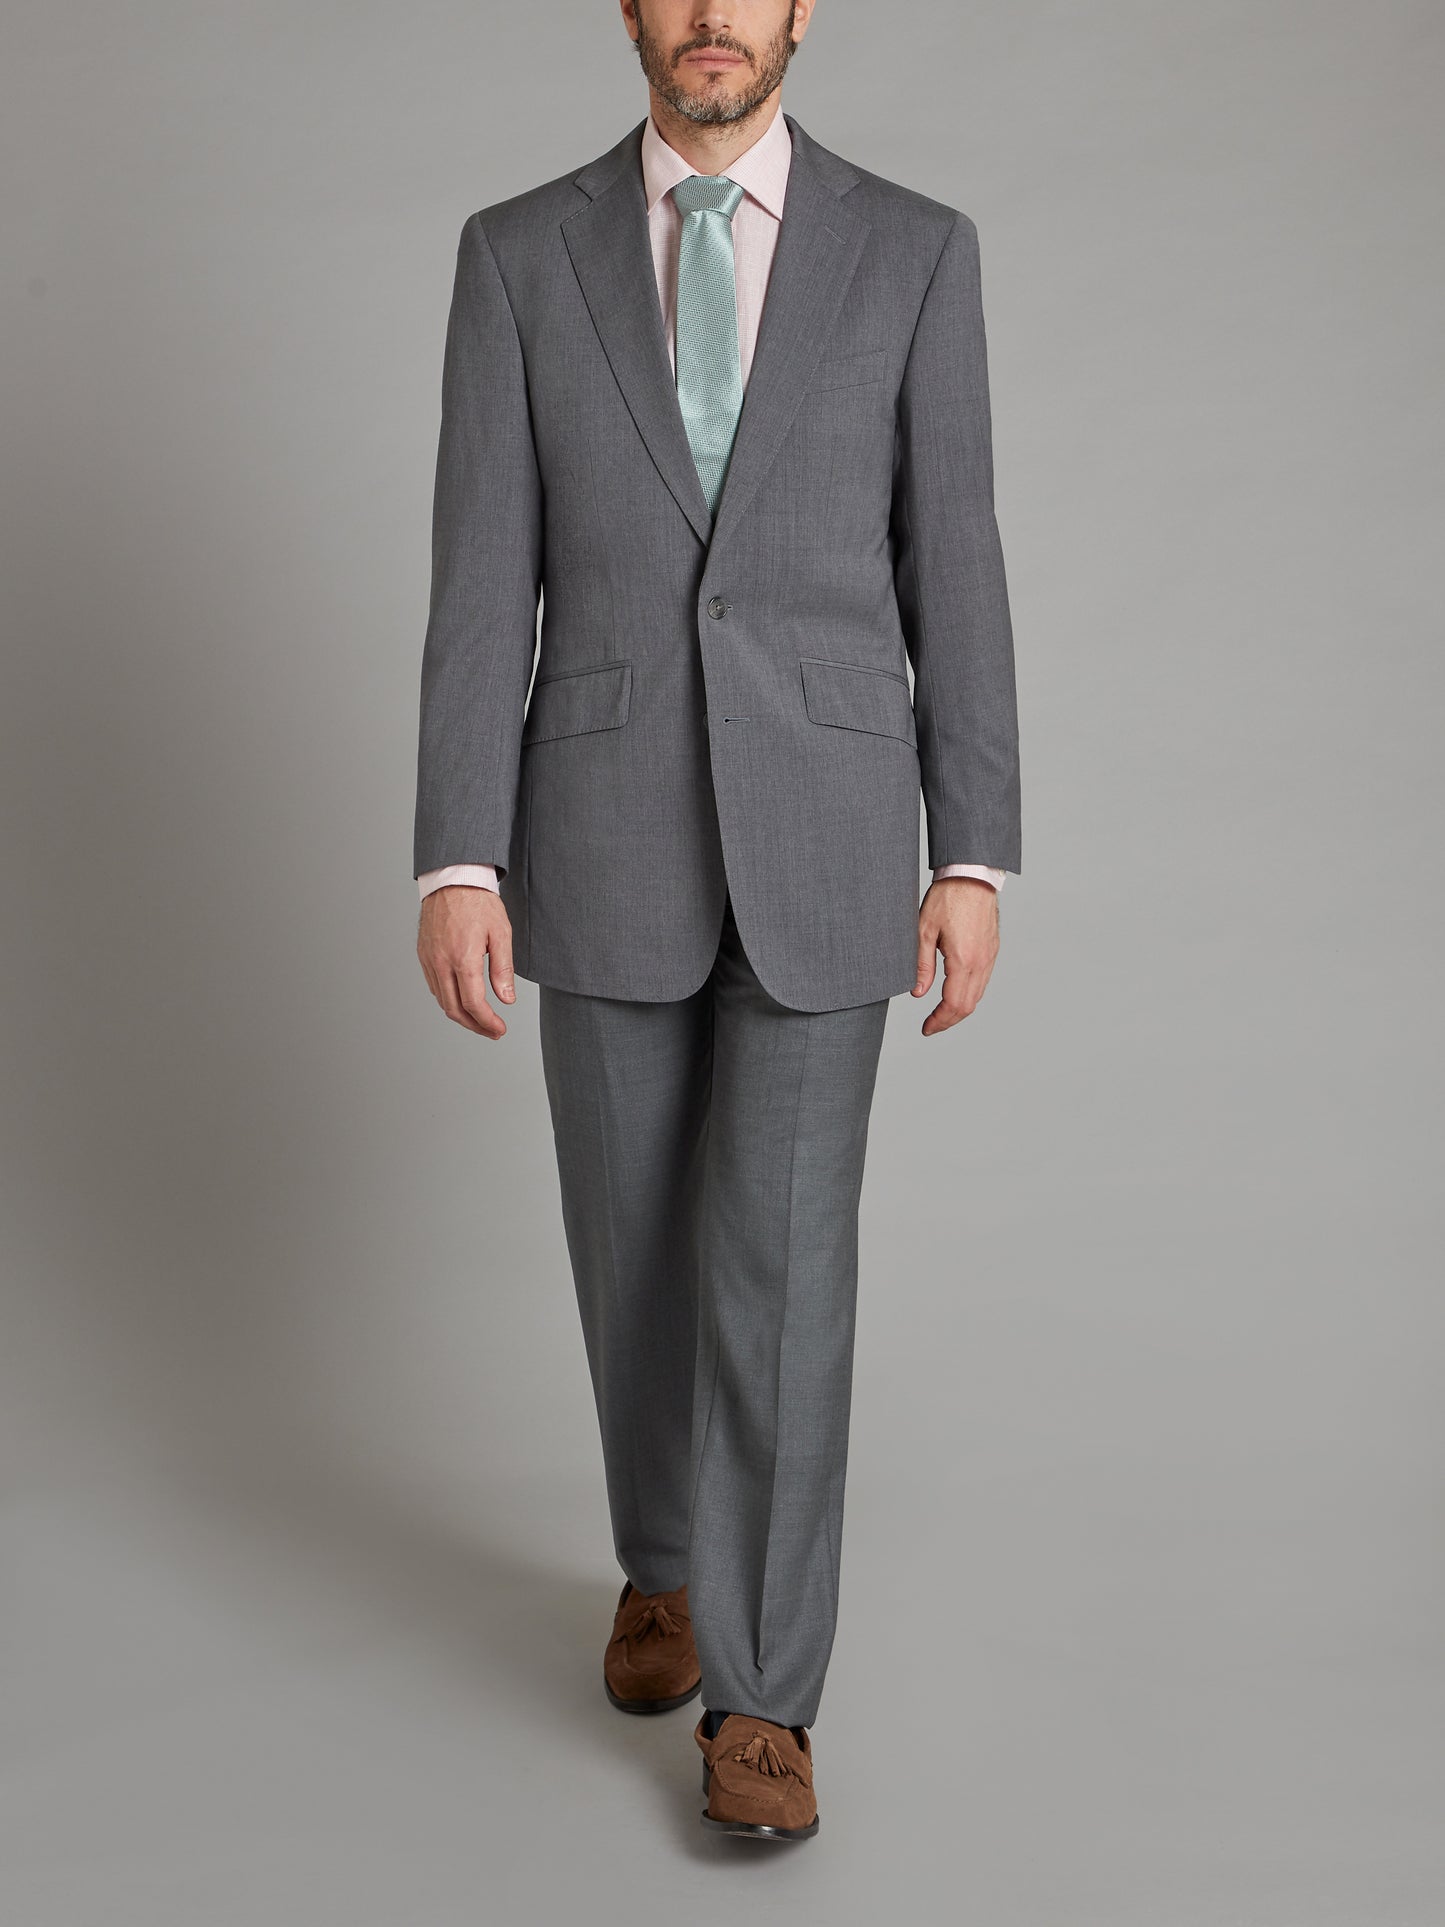 Limited Edition Sloane Suit - Lightweight Grey